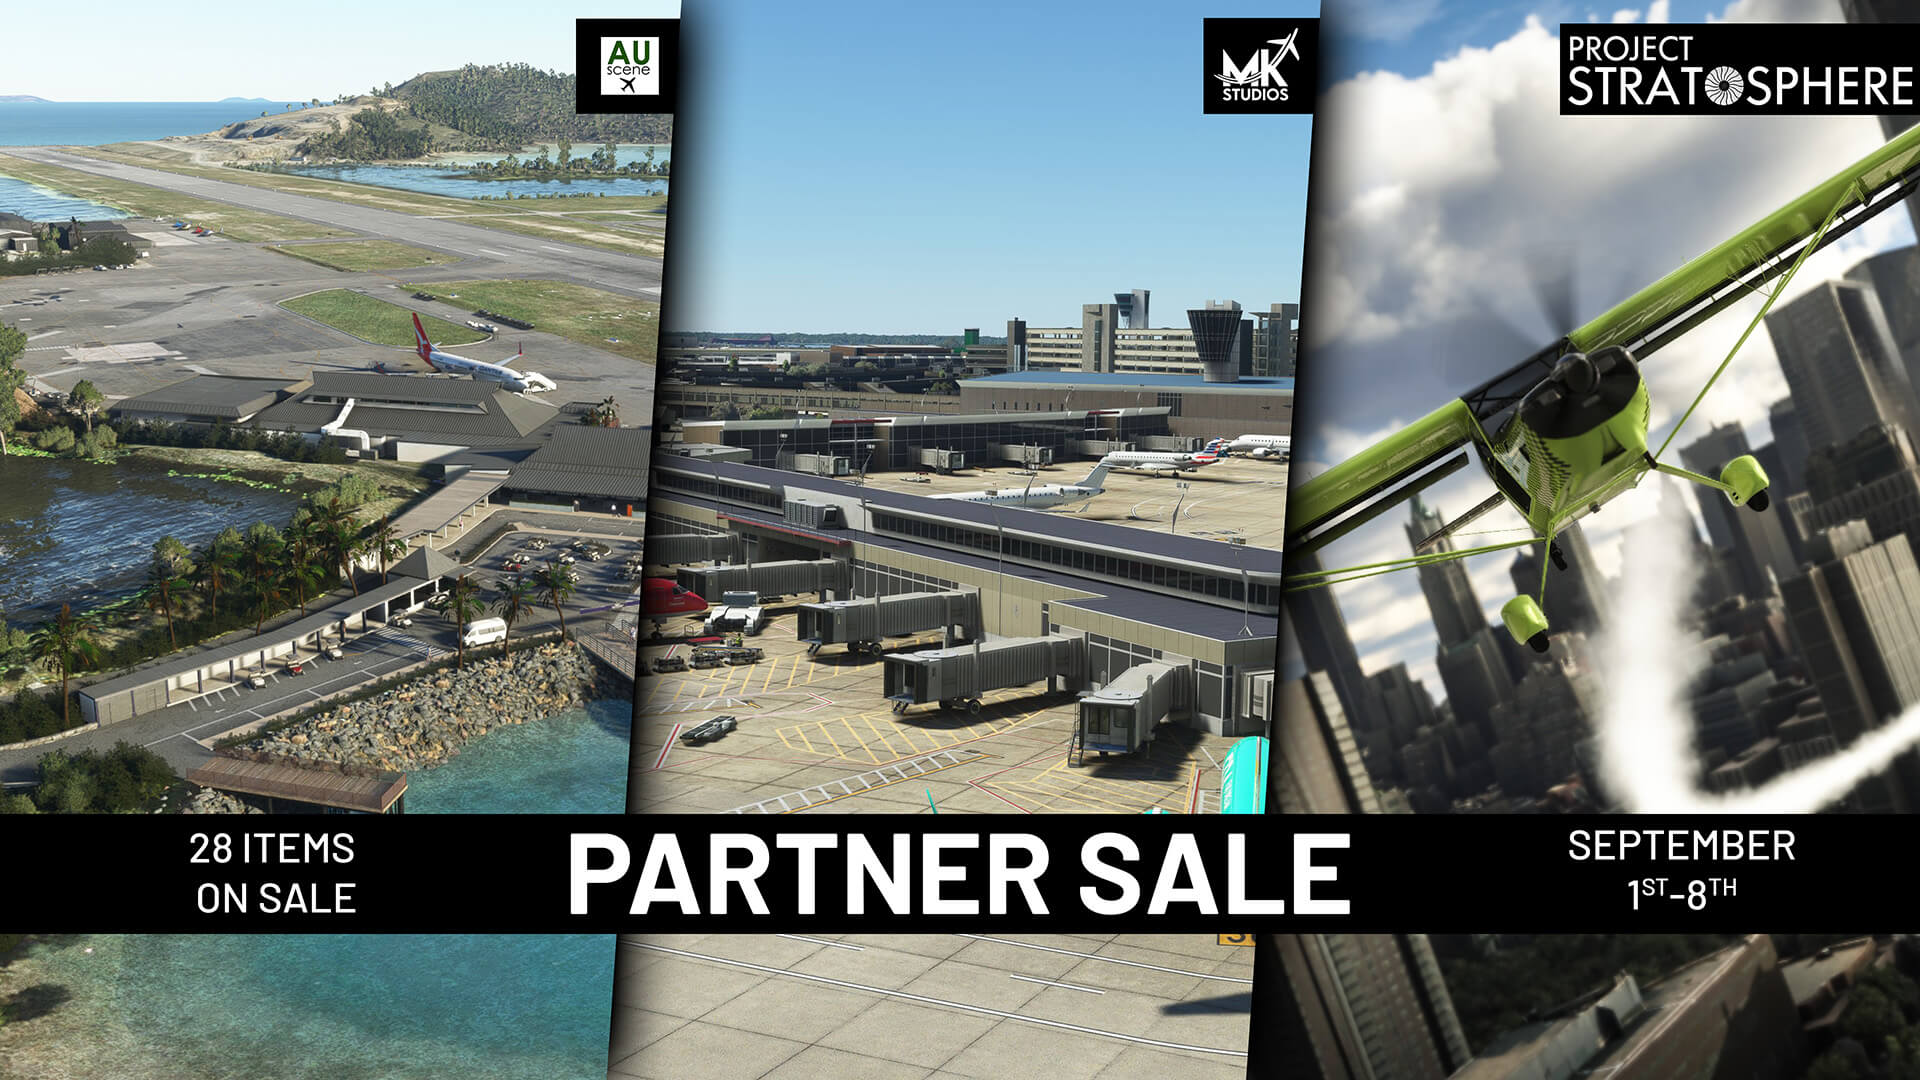 Partner Sale with AUscene, MK-Studios, and Project Stratosphere. 28 items on sale. Runs from September 1st - 8th,